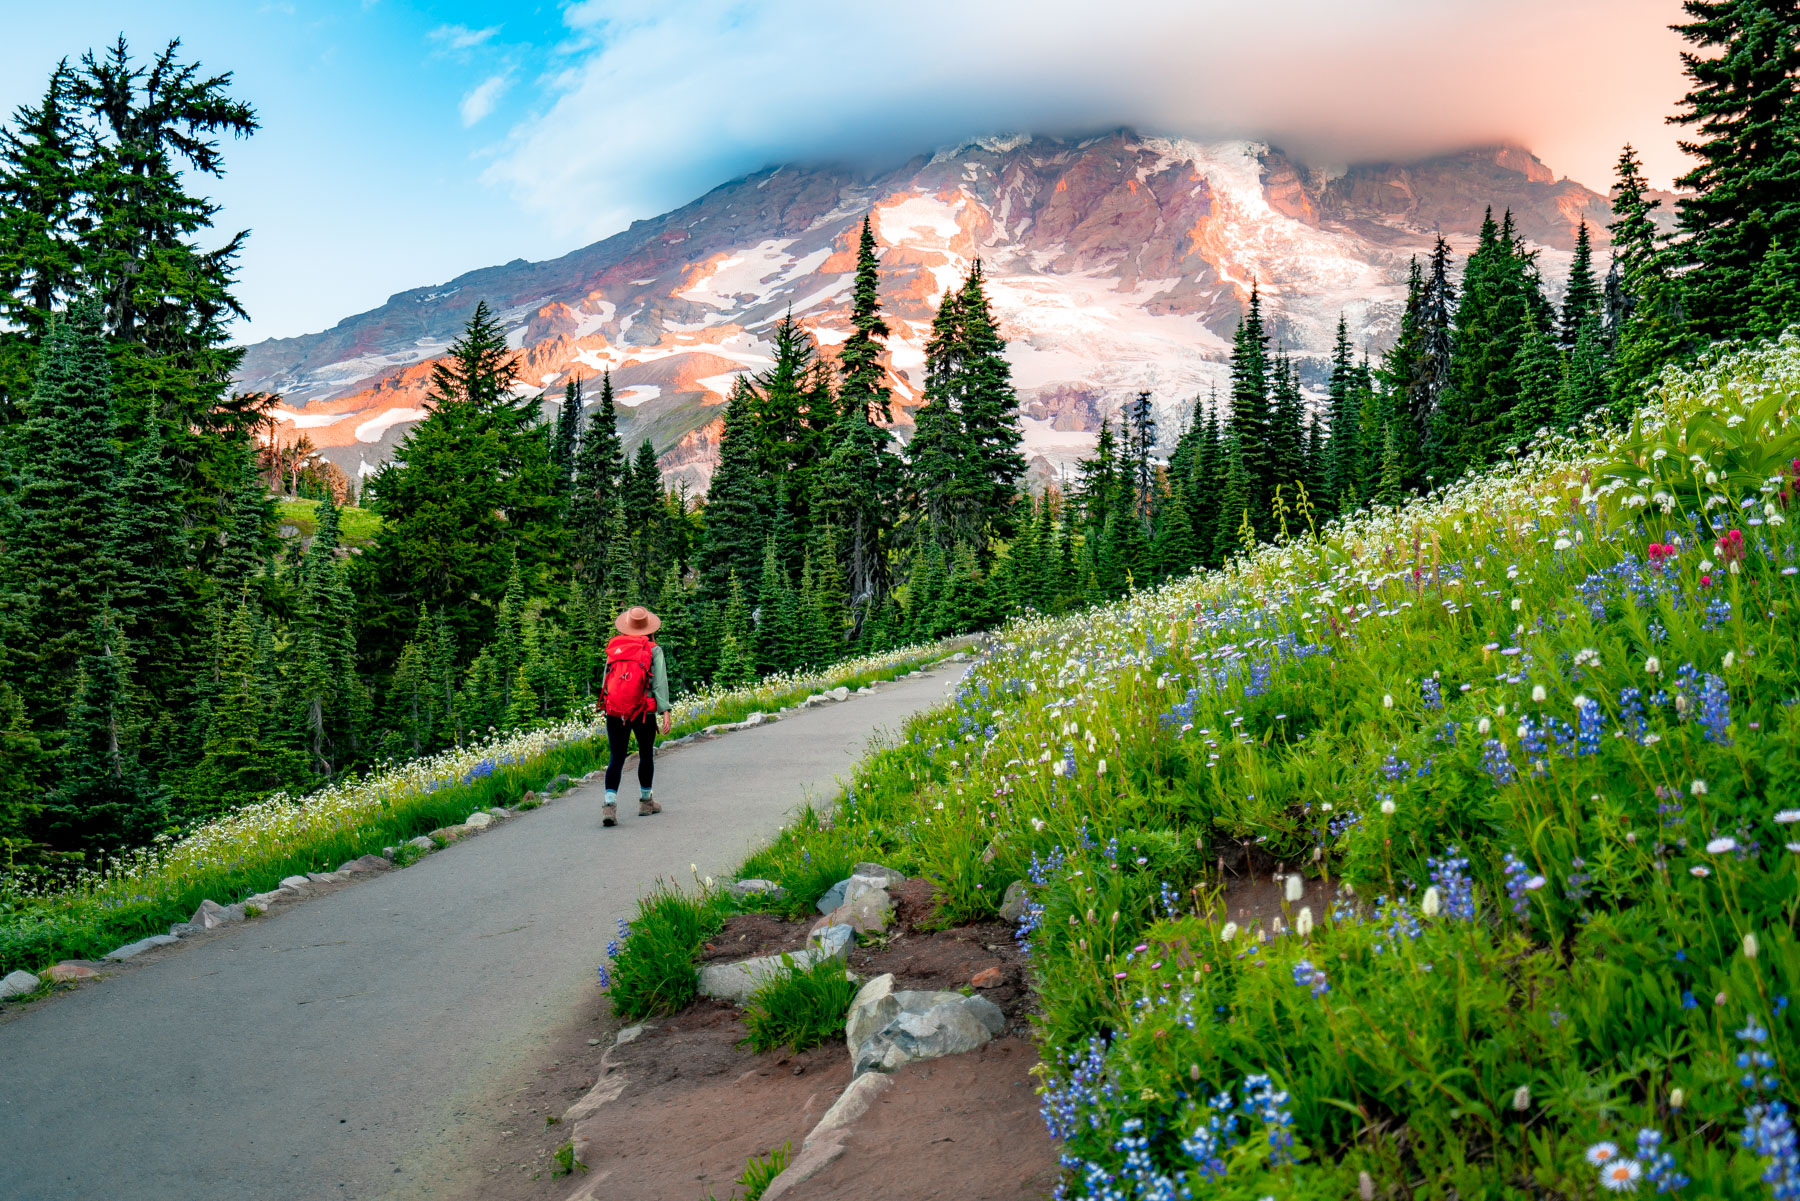 Things to do at Mt. Rainier National Park